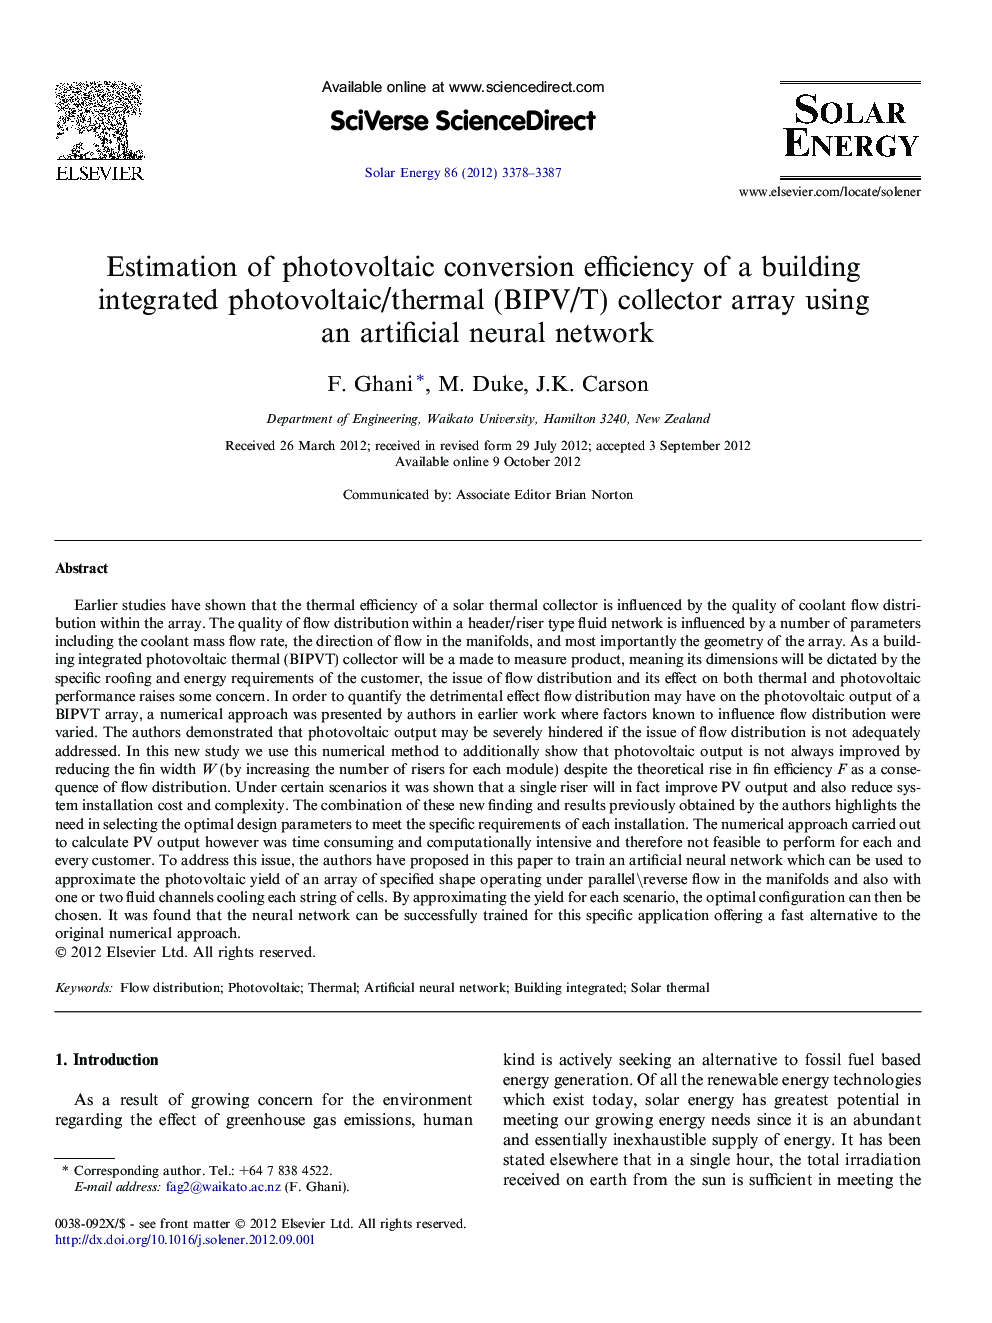 Estimation of photovoltaic conversion efficiency of a building integrated photovoltaic/thermal (BIPV/T) collector array using an artificial neural network